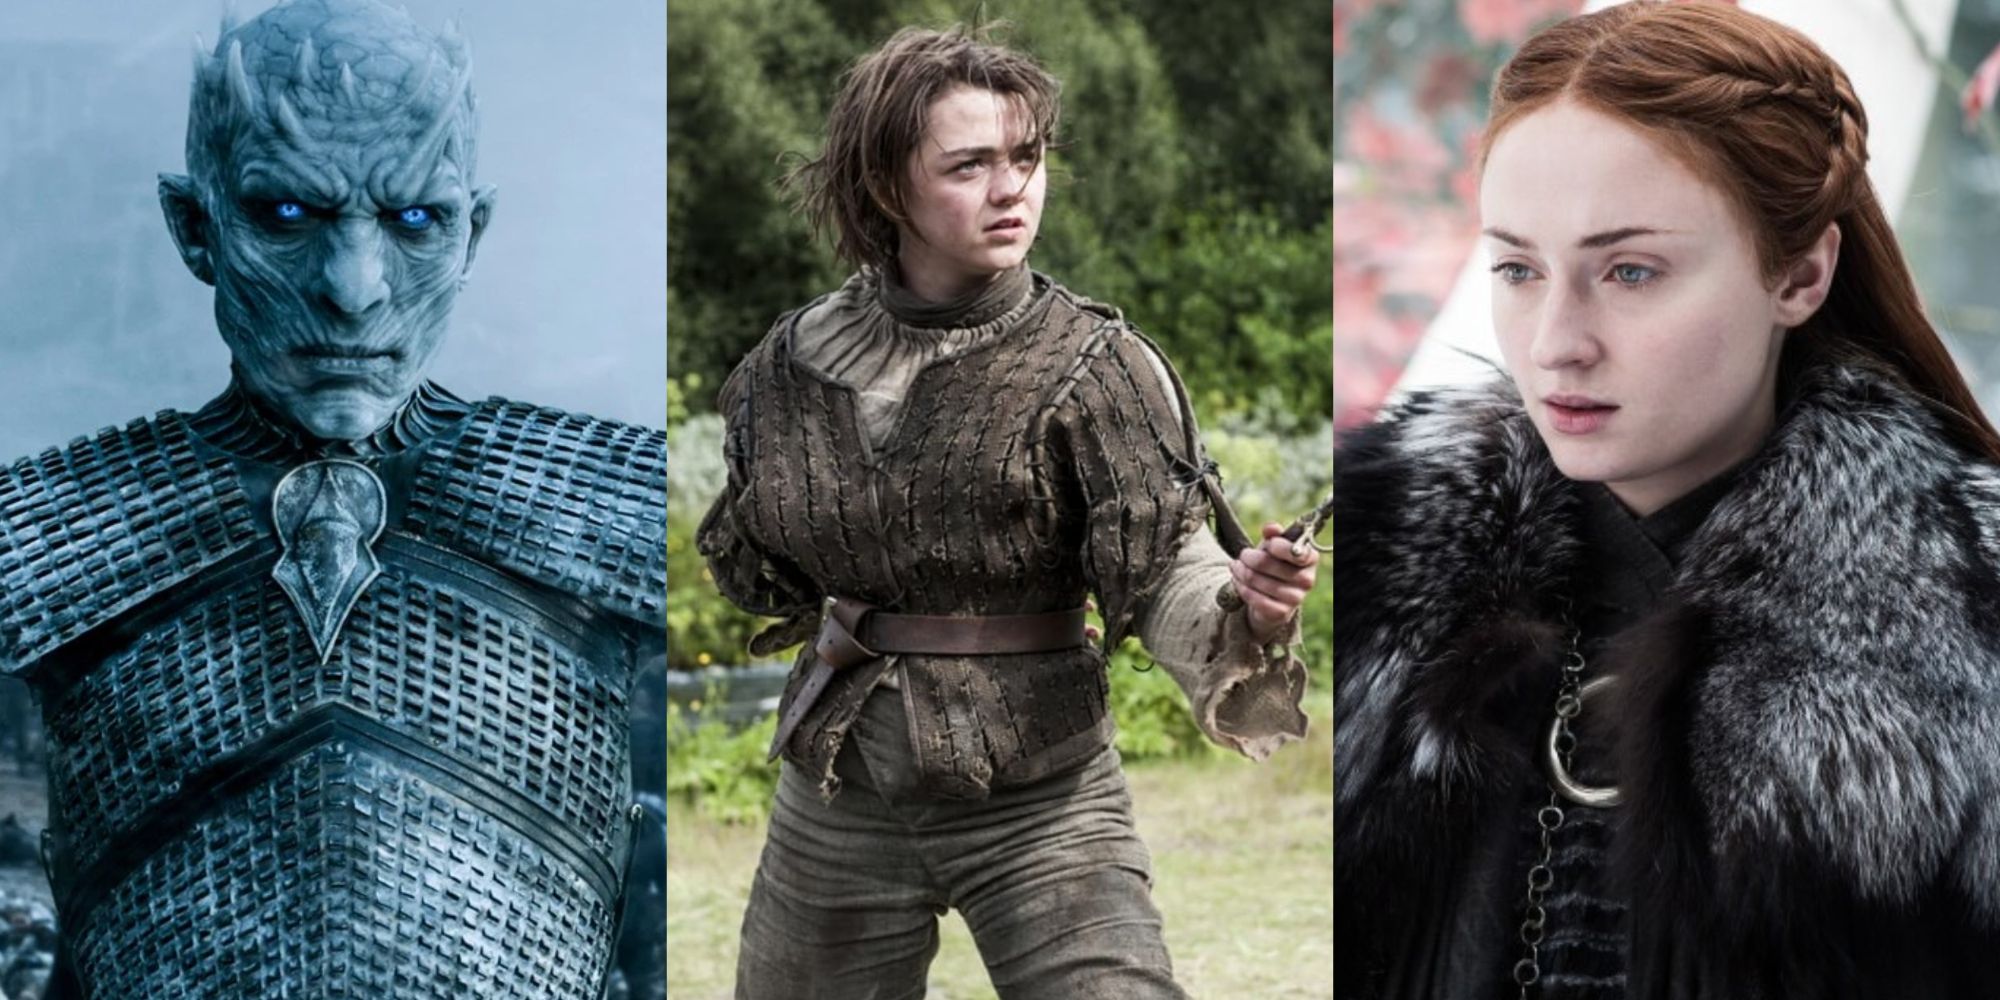 Game Of Thrones: 10 Unpopular Opinions About Arya Stark, According To Reddit